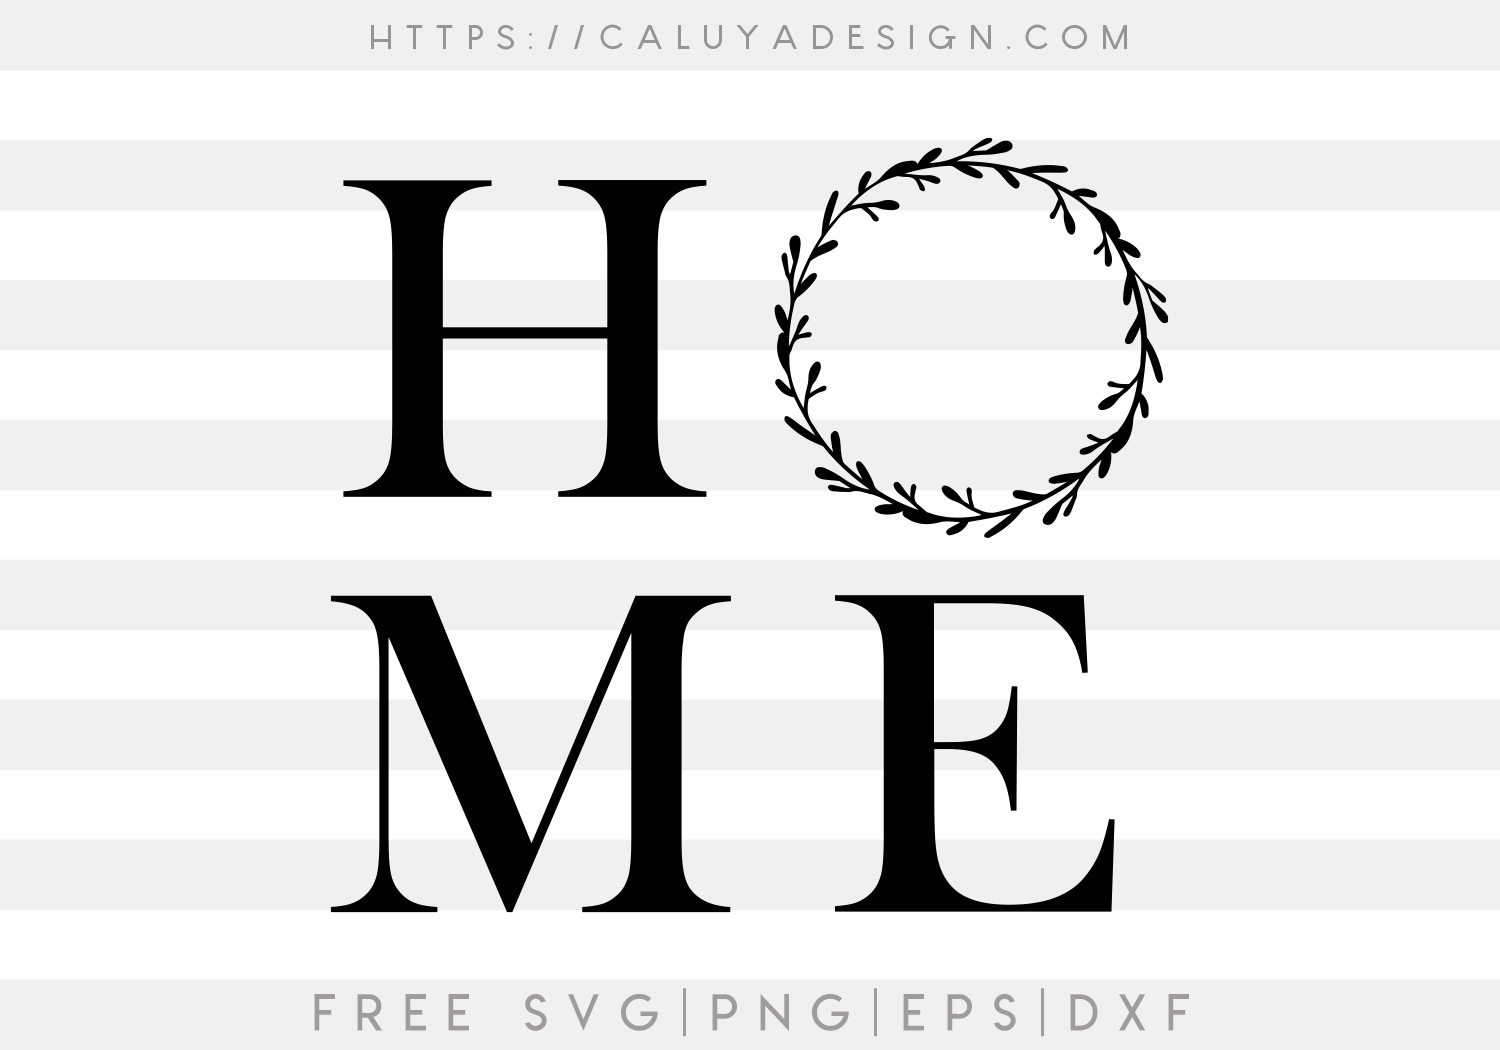 Download 15 Free Sign Making Svg Png Files You Need To Download Now